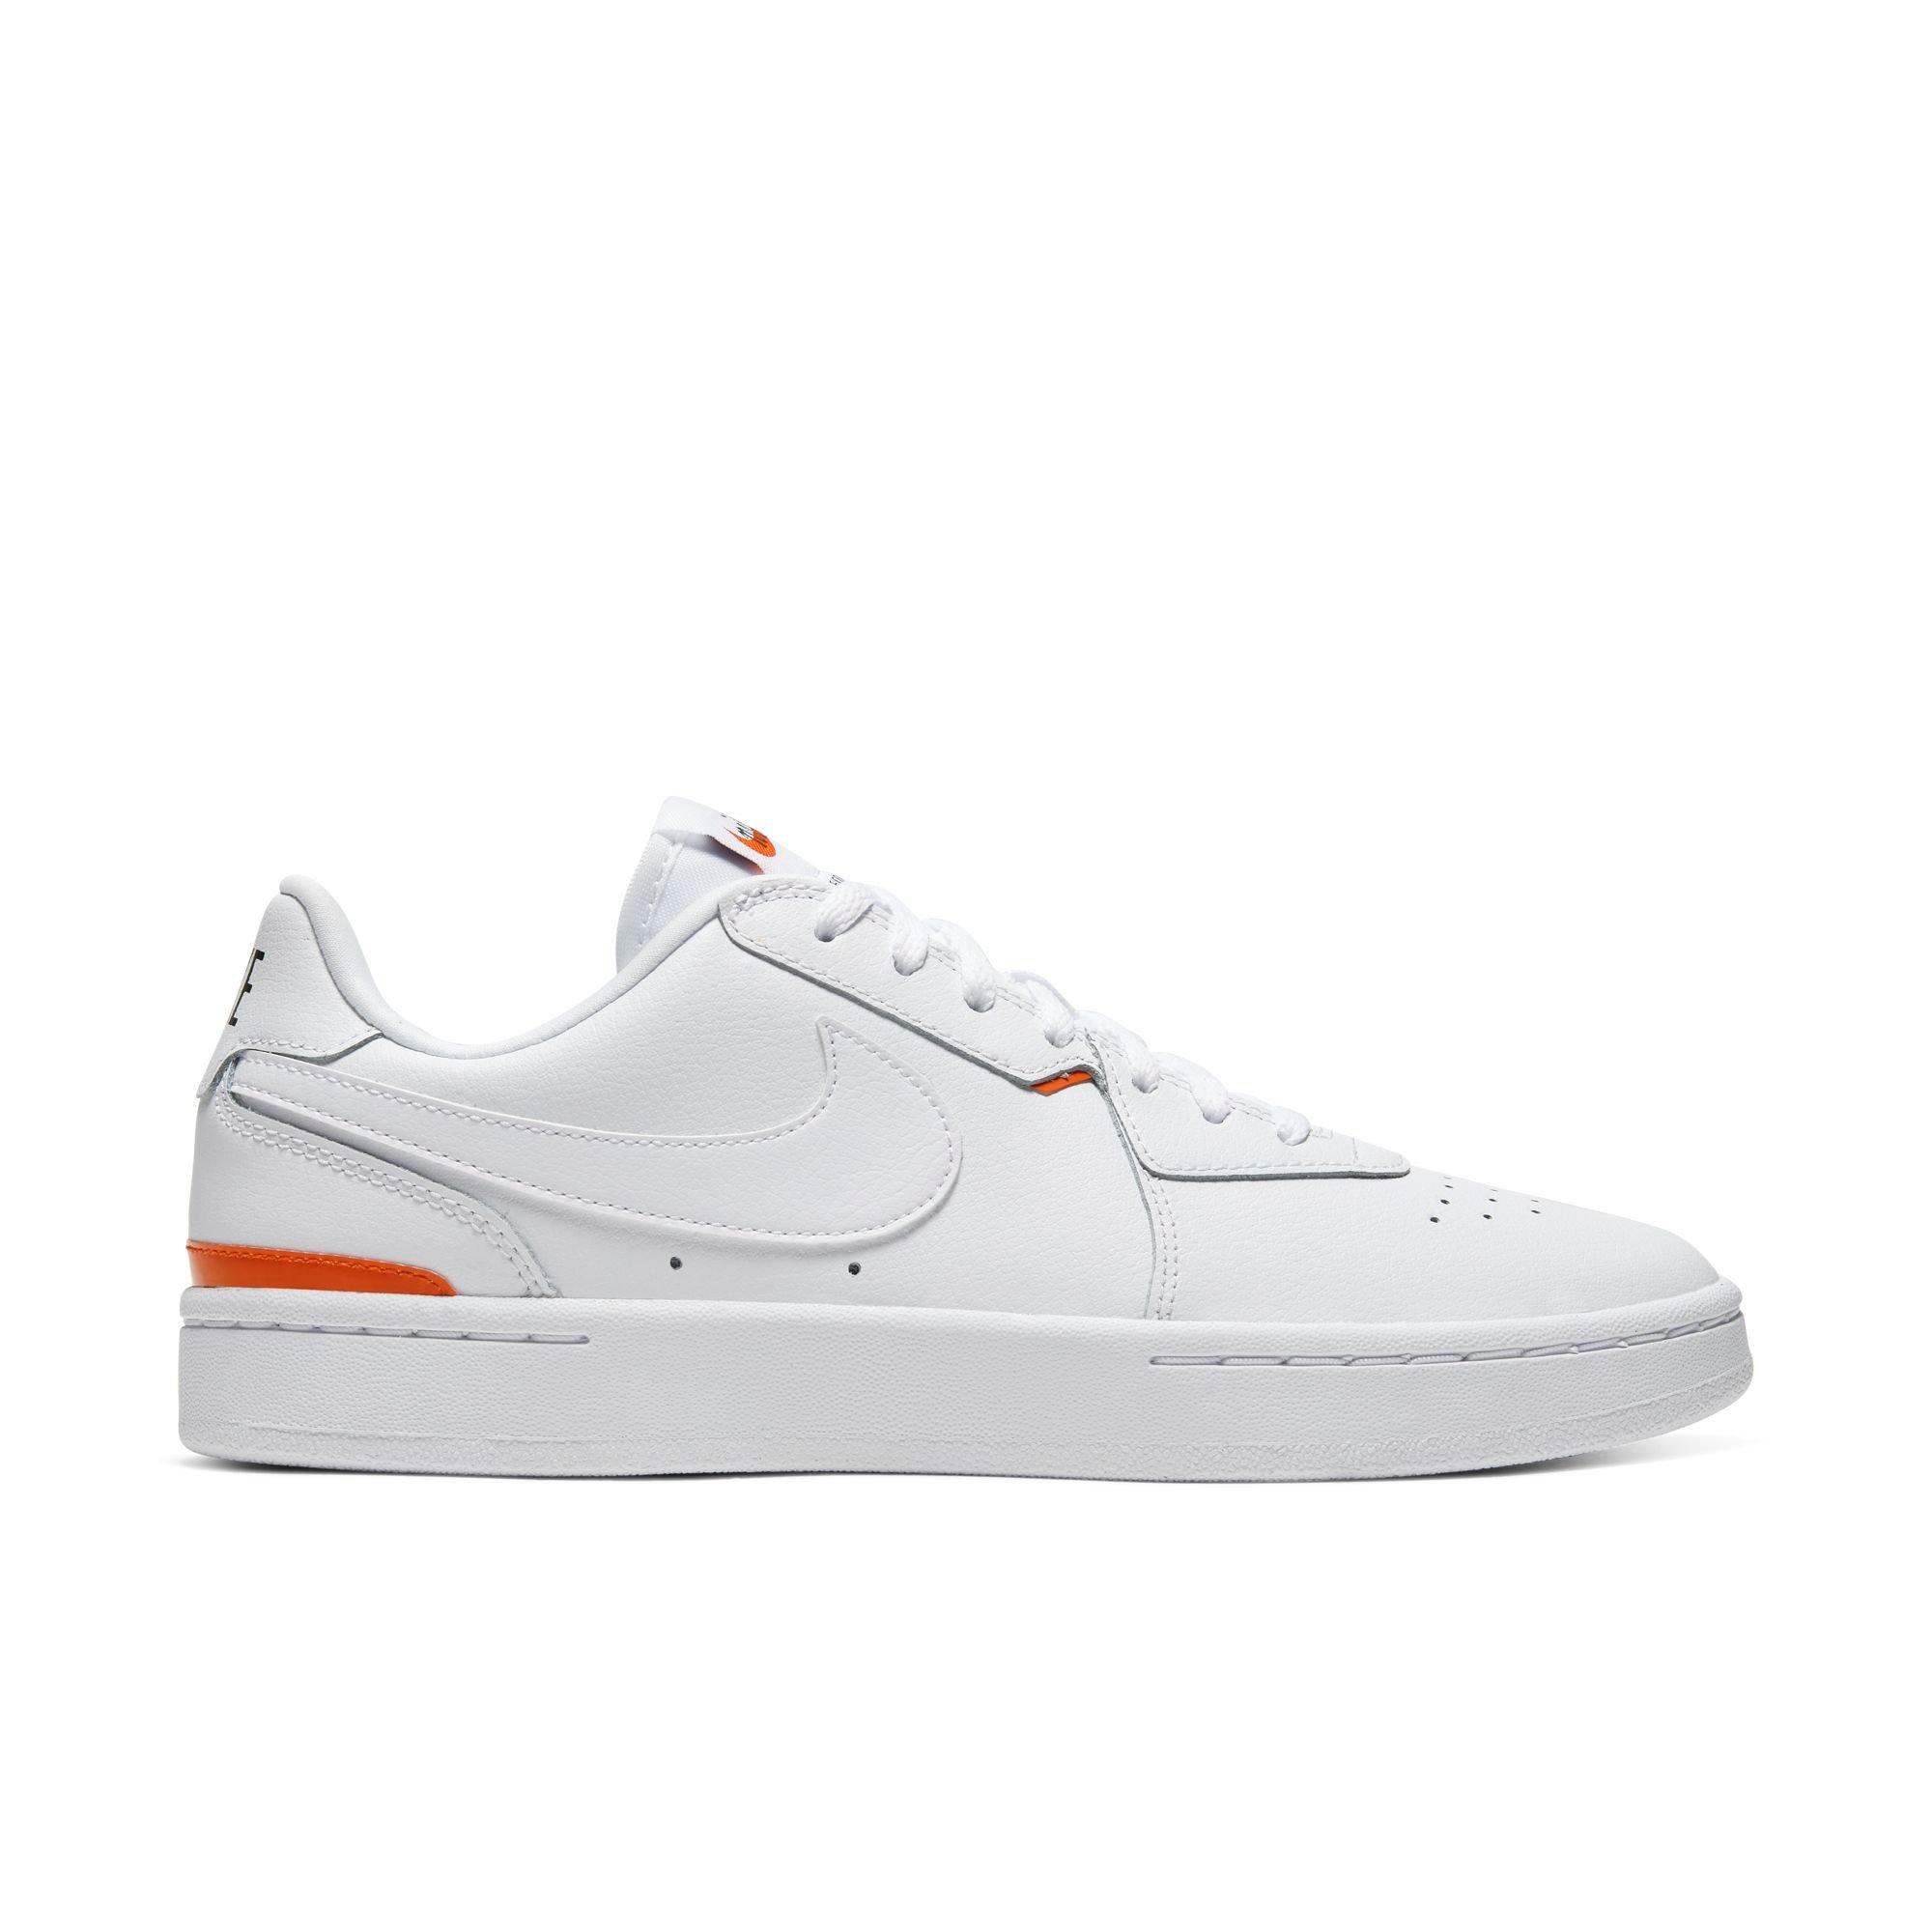 orange and white tennis shoes